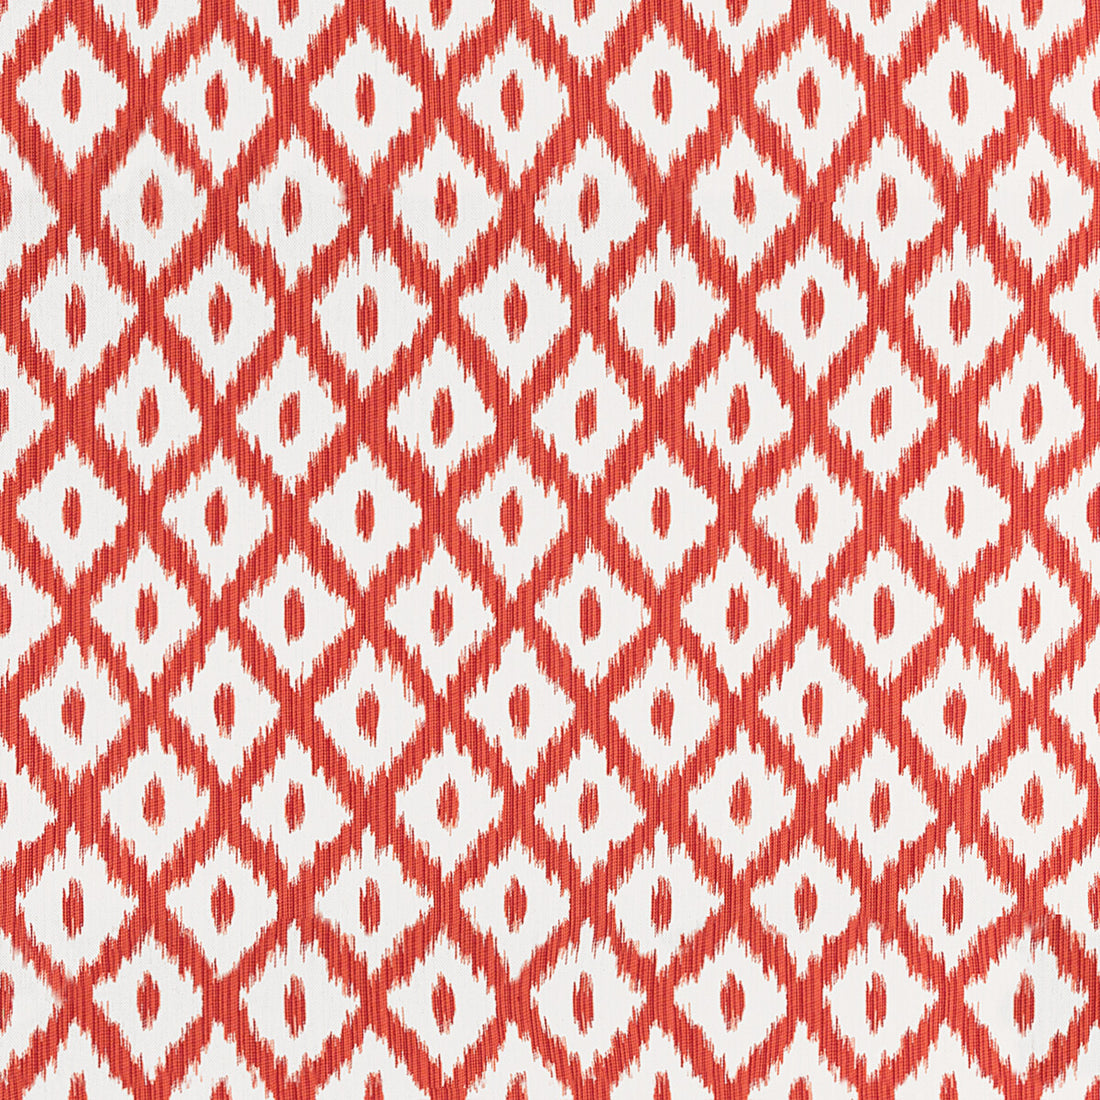 Pitigala fabric in poppy color - pattern 35762.12.0 - by Kravet Basics in the Ceylon collection